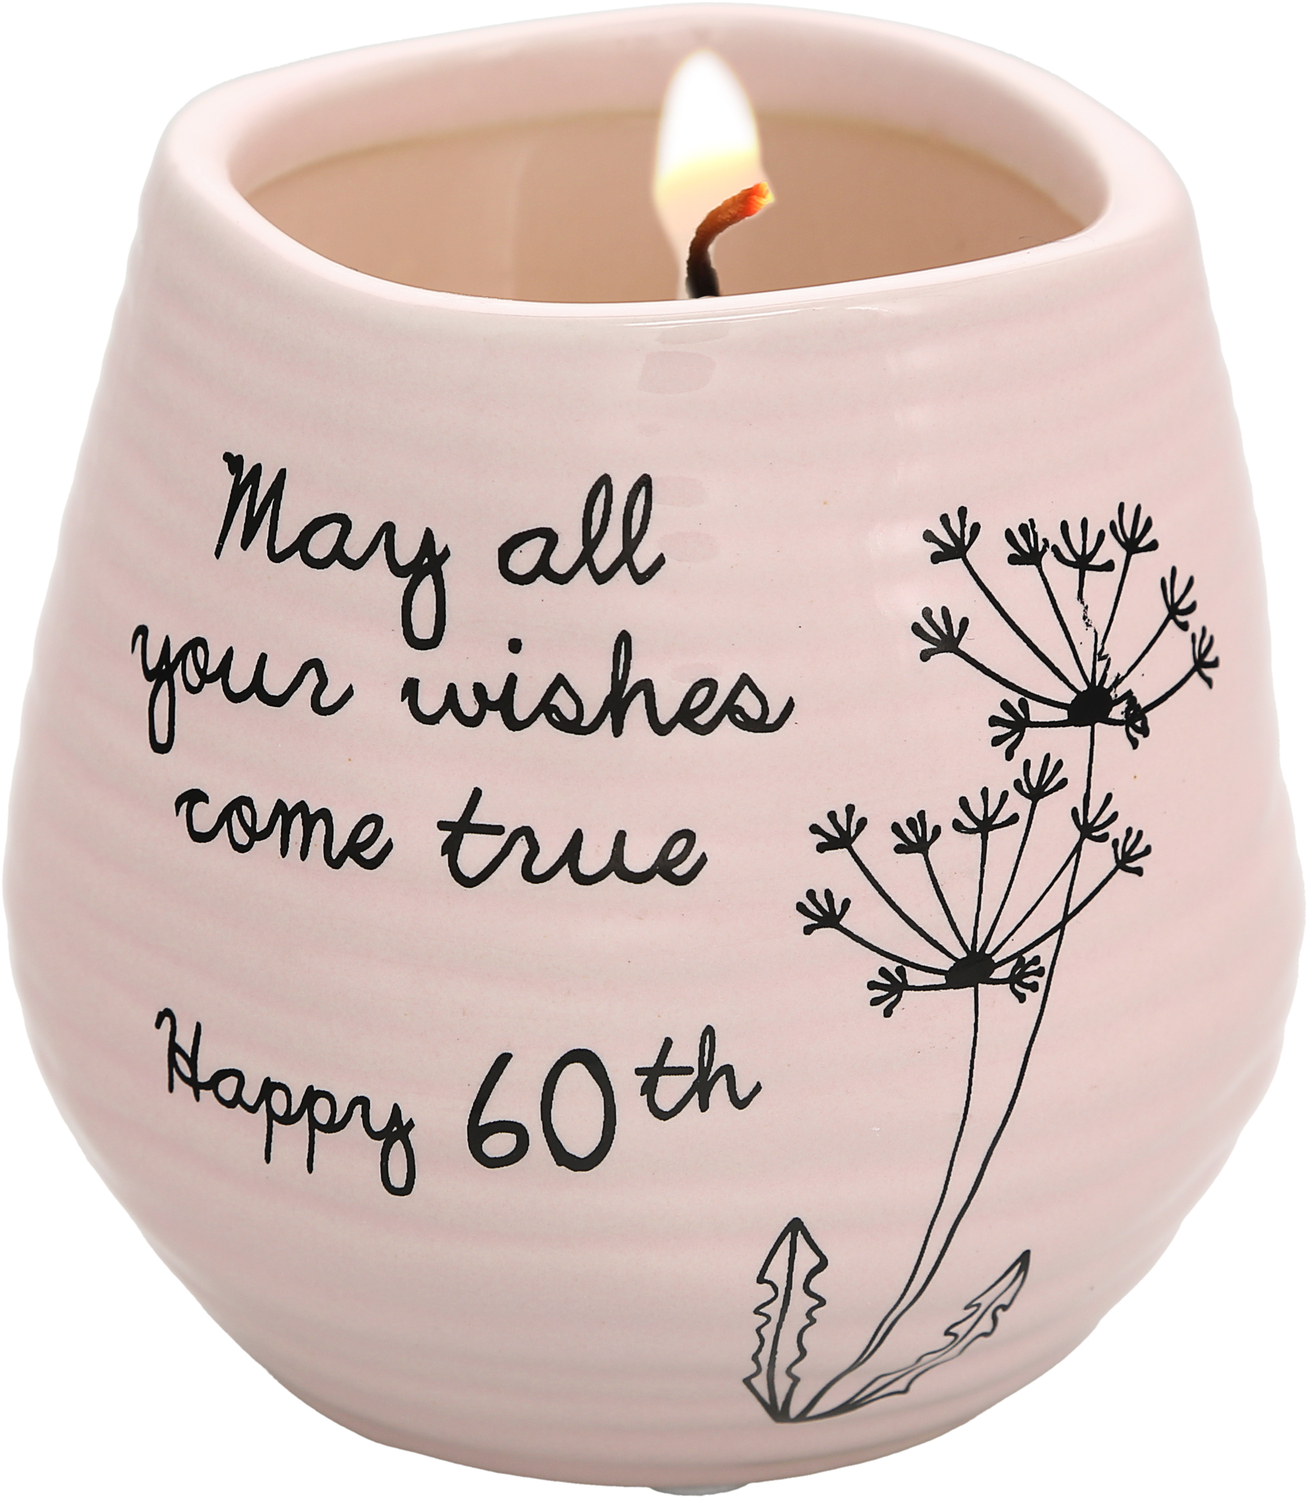 Happy 60th by Dandelion Wishes - Happy 60th - 8 oz - 100% Soy Wax Candle
Scent: Serenity